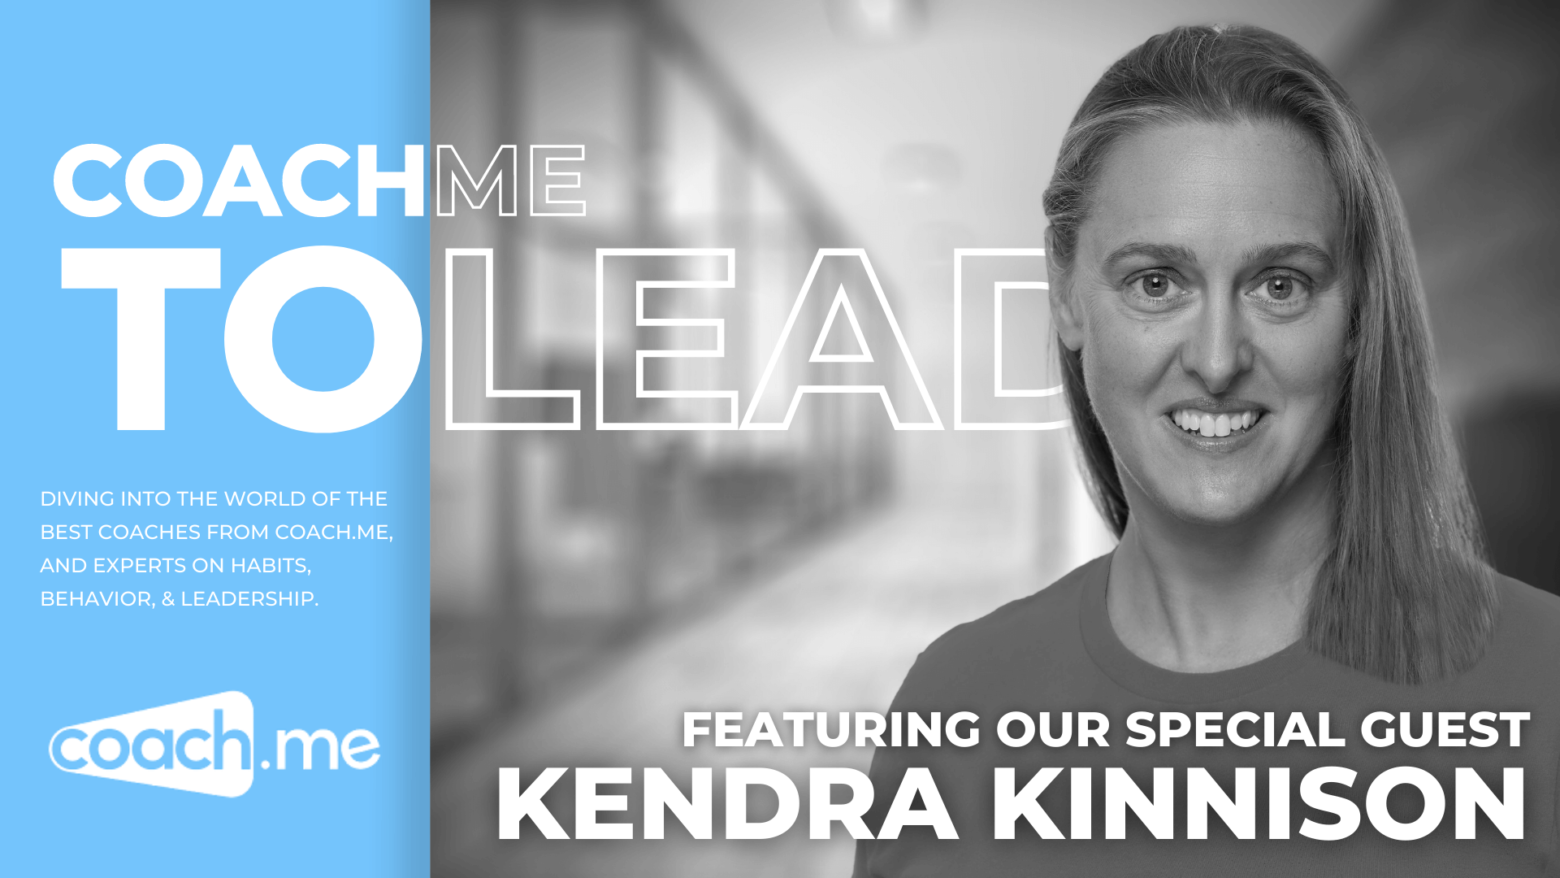 Kendra Kinnison on habit forming with coach.me